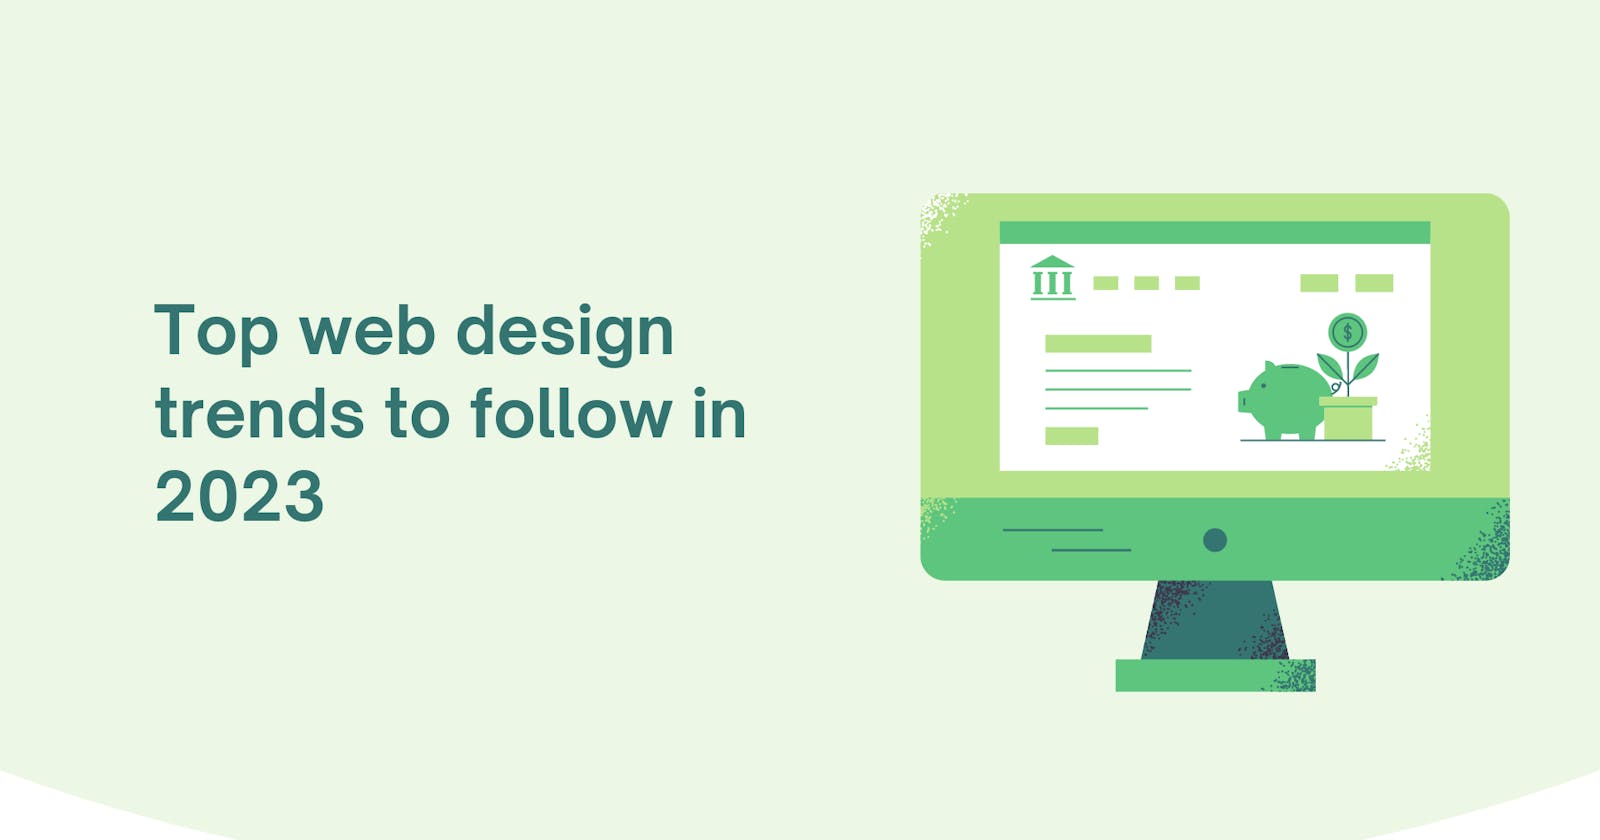 Top web design trends to follow in 2023